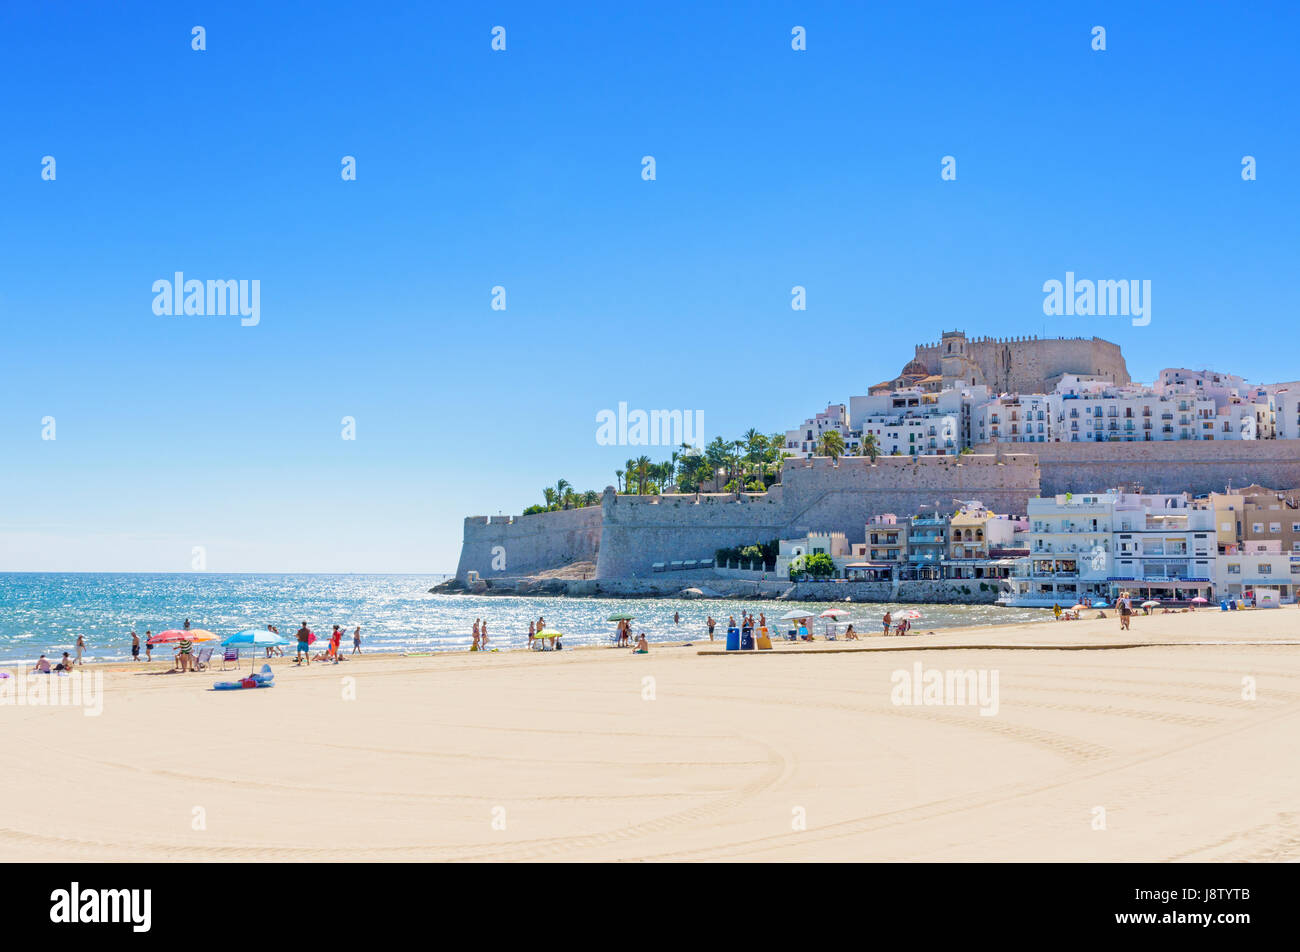 Peniscola's Papa Luna Castle and old town overlooking people enjoying the sea, sand and sun on Playa Norte beach, Peniscola, Spain Stock Photo